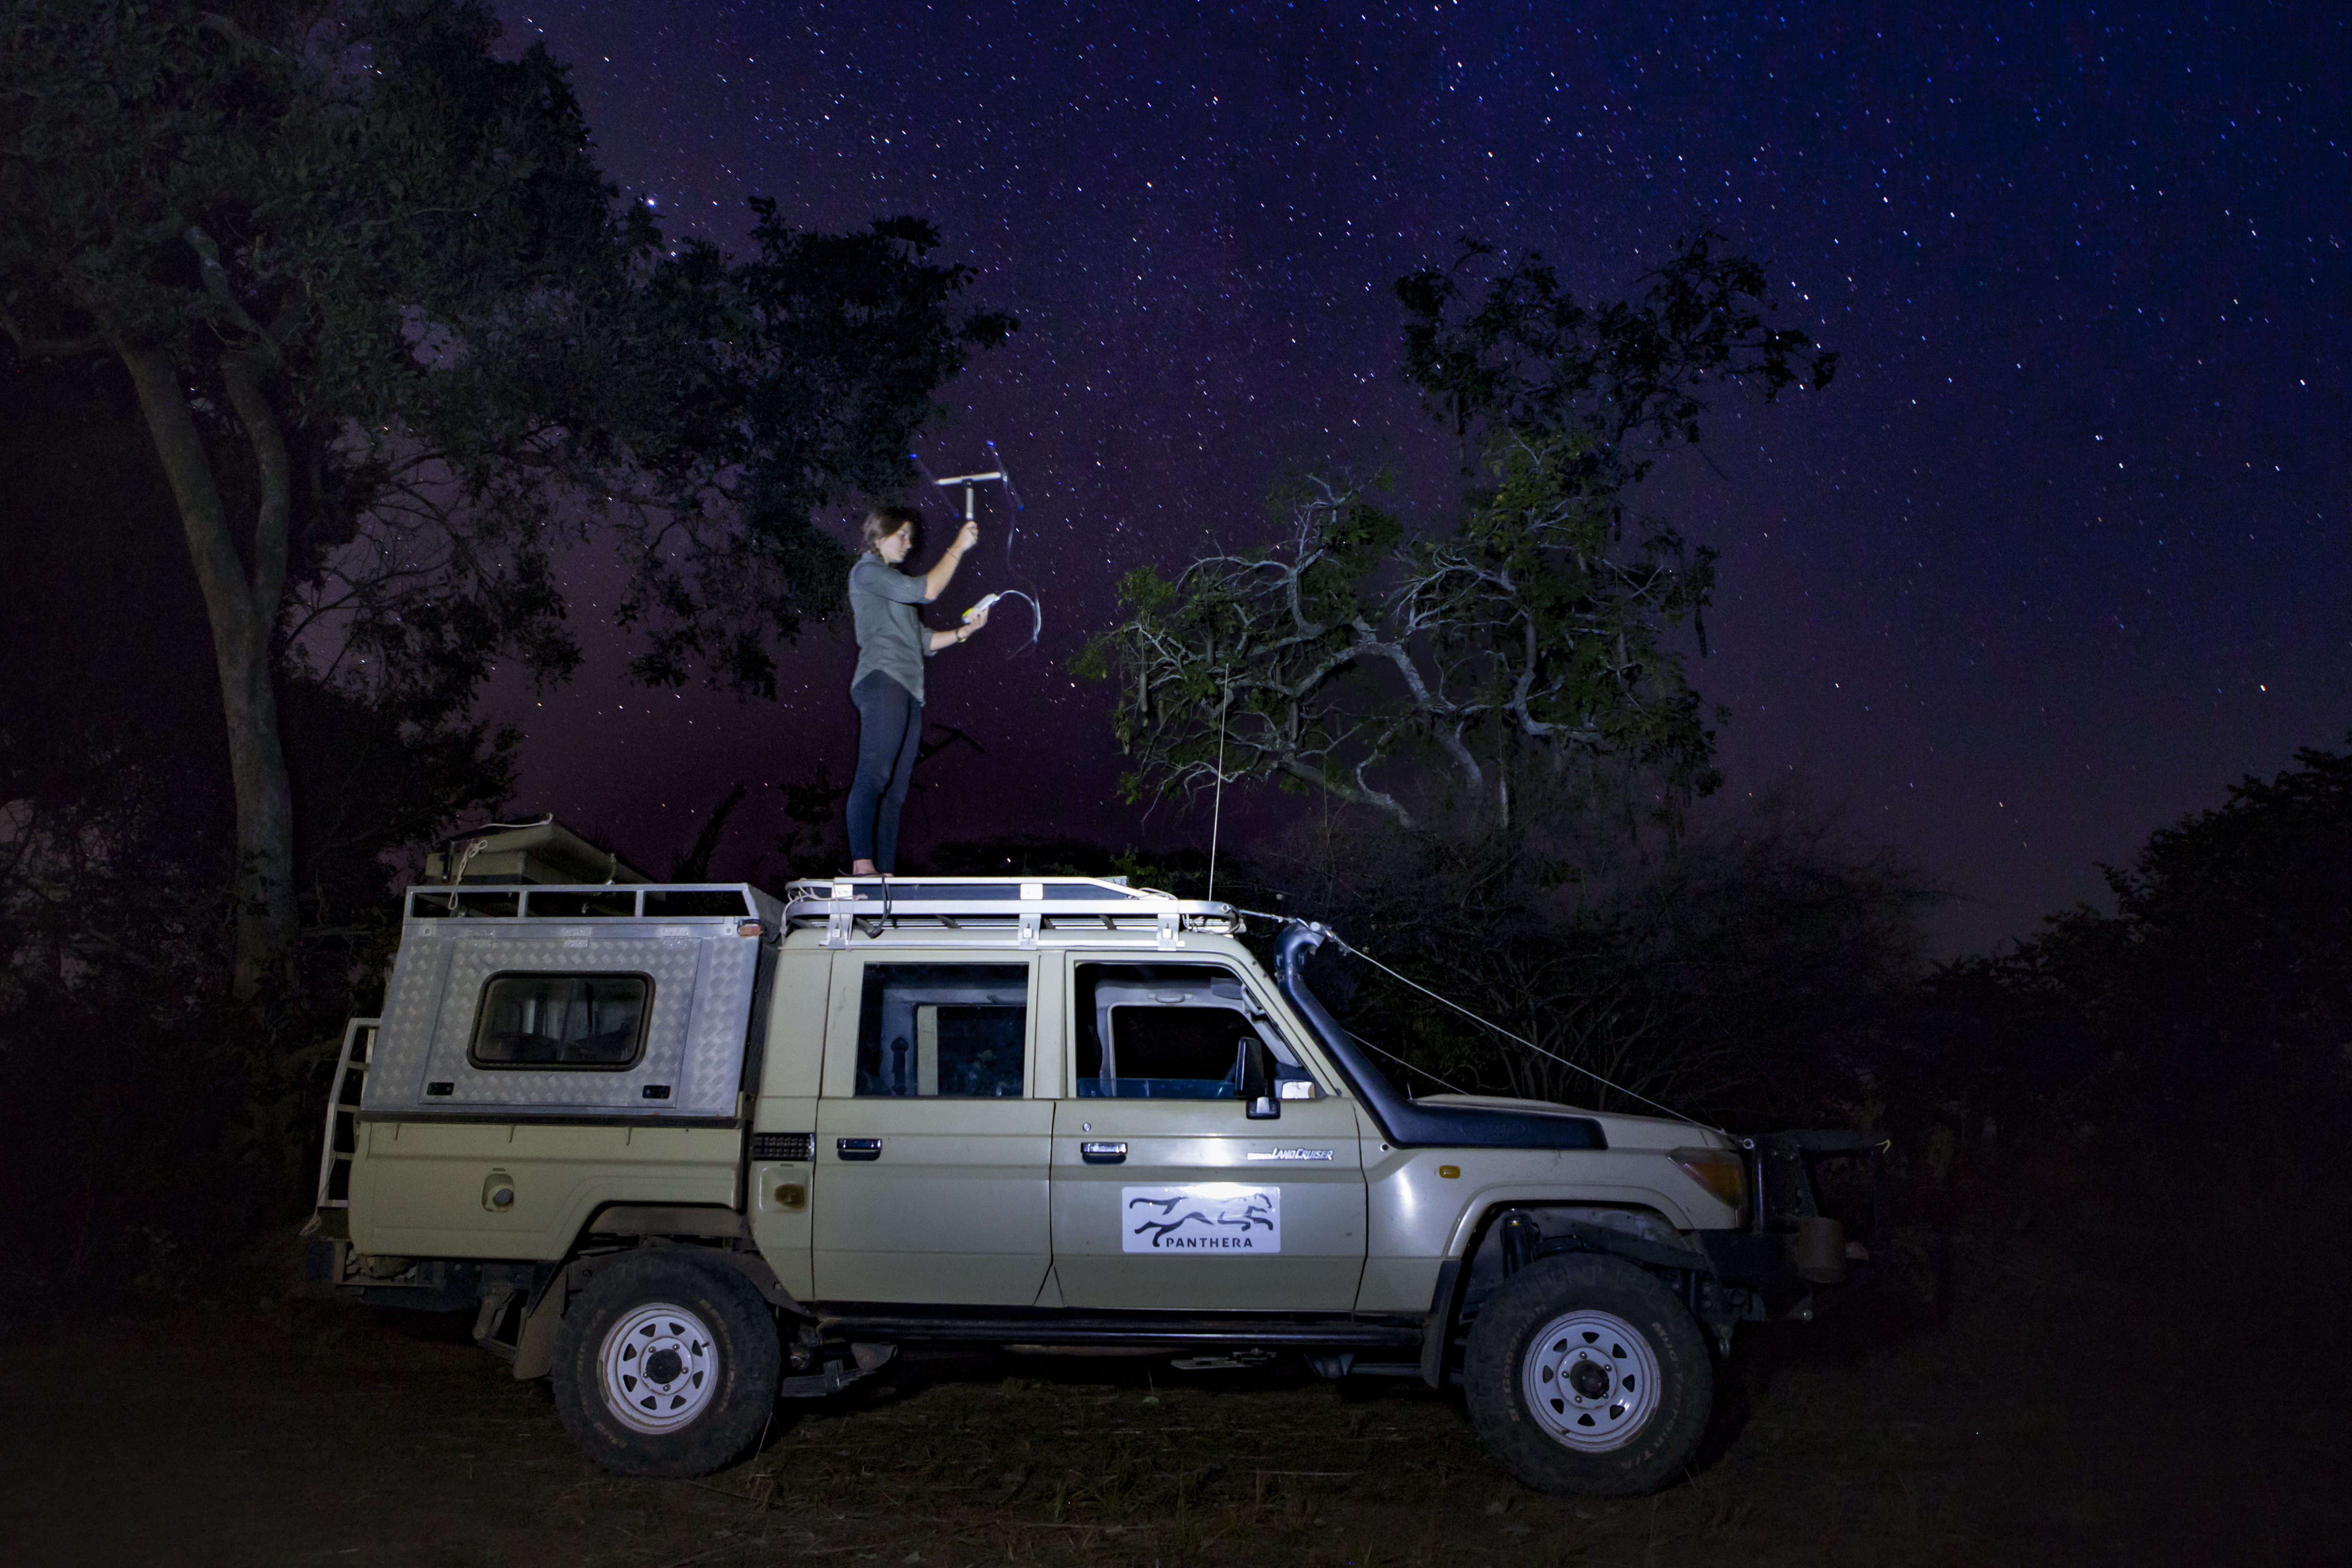 "African Lion biologist, Xia Stevens, tracking female lion at night, Kafue National Park, Zambia"